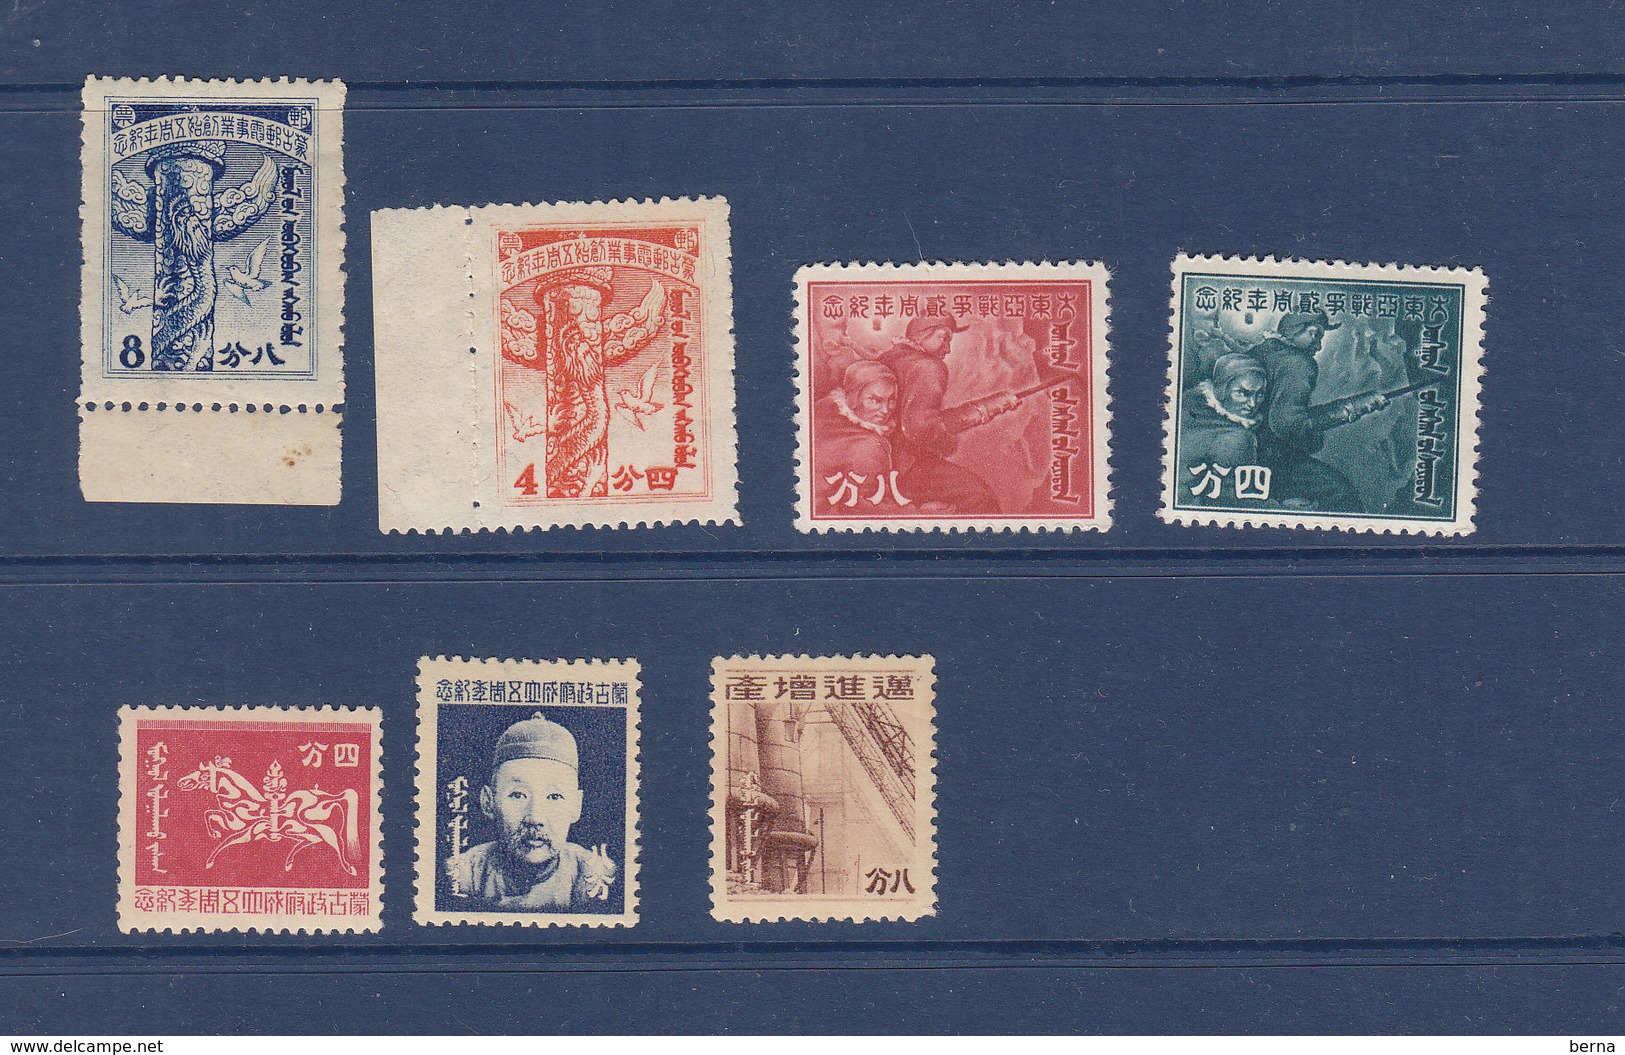 CHINA JAPANESE OCCUPATION OF MENGKIANG SG 104/110 COMPLETE SET MINT HINGED - 1941-45 Chine Du Nord